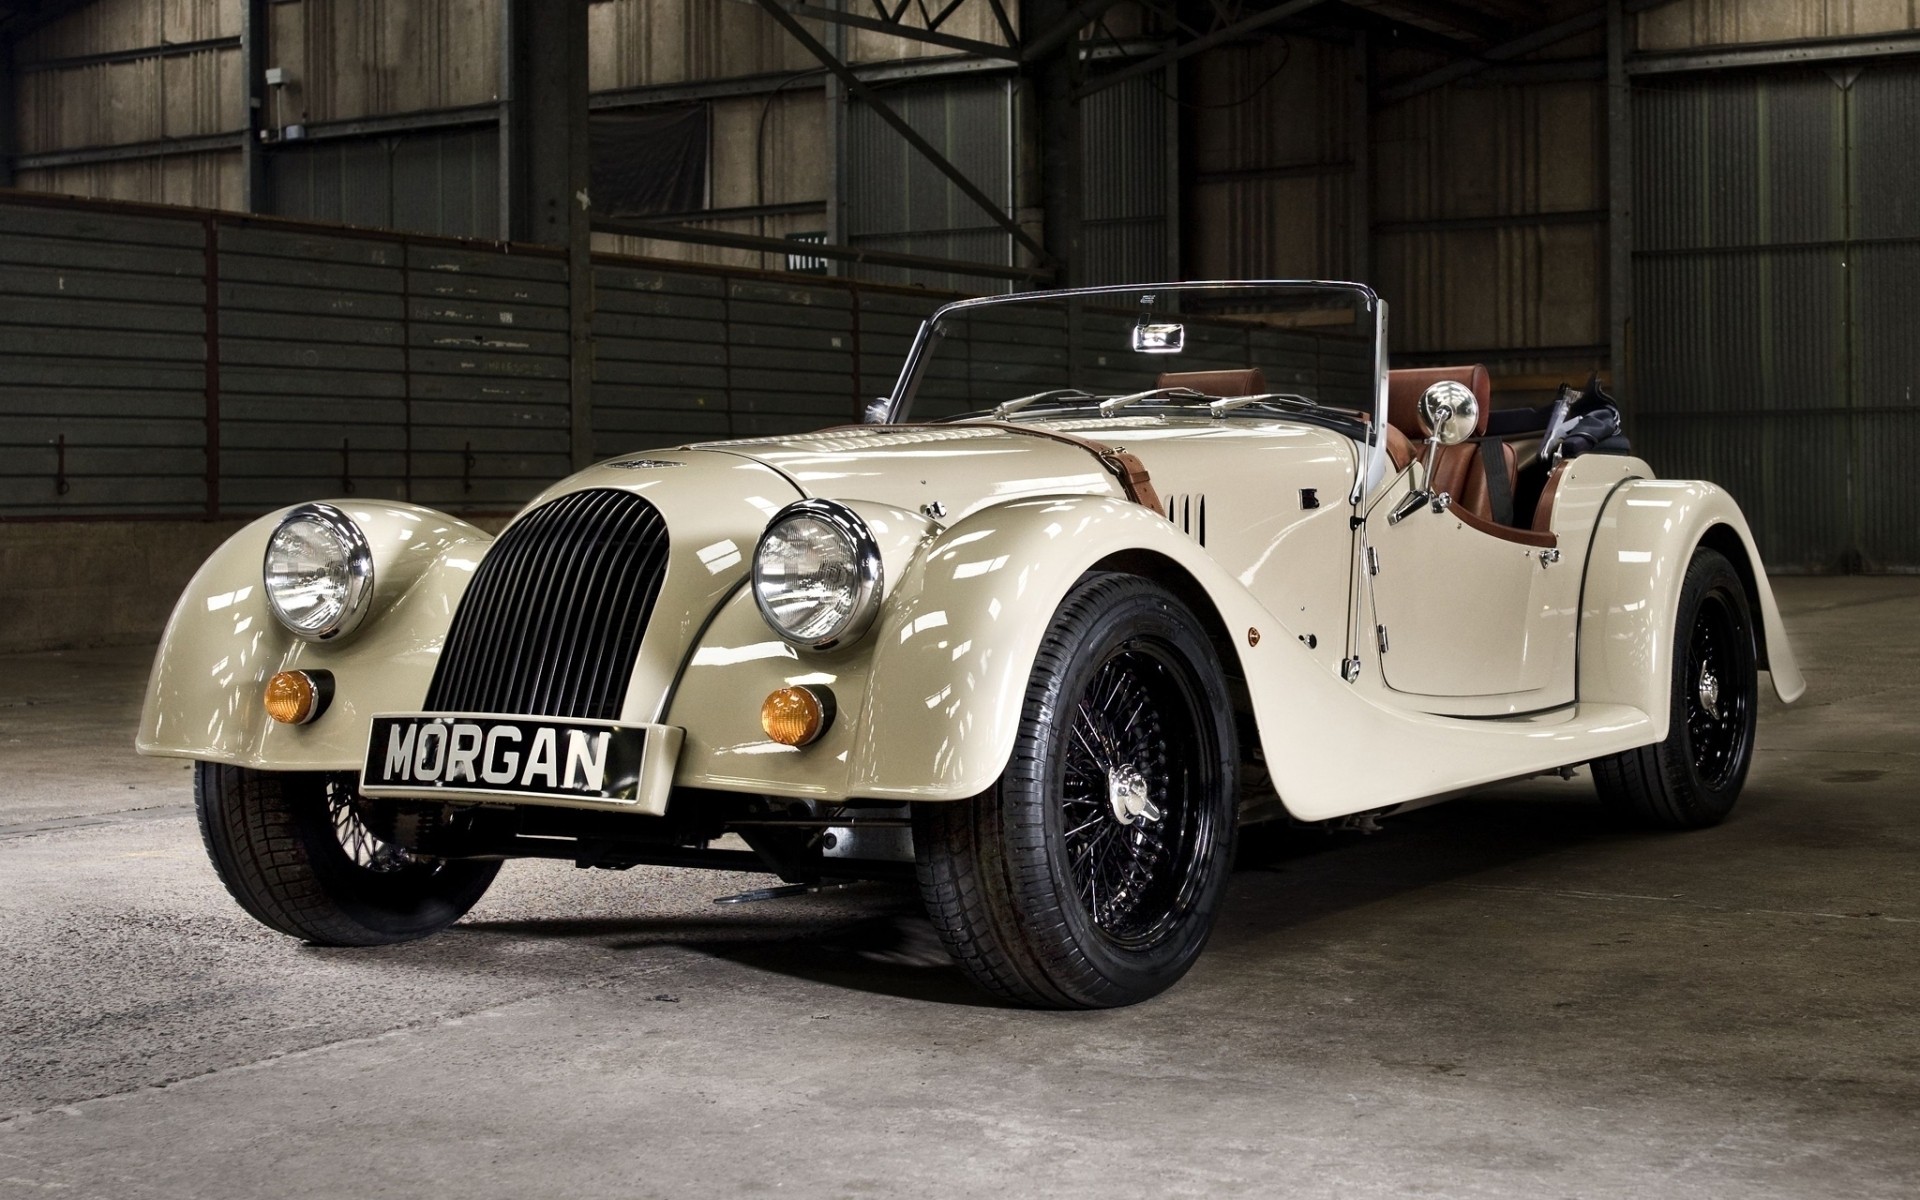 morgan car vehicle transportation system drive automotive wheel exhibition machine classic fast speed convertible coupe engine morgan roadster vintage cars old cars classic cars sport cars